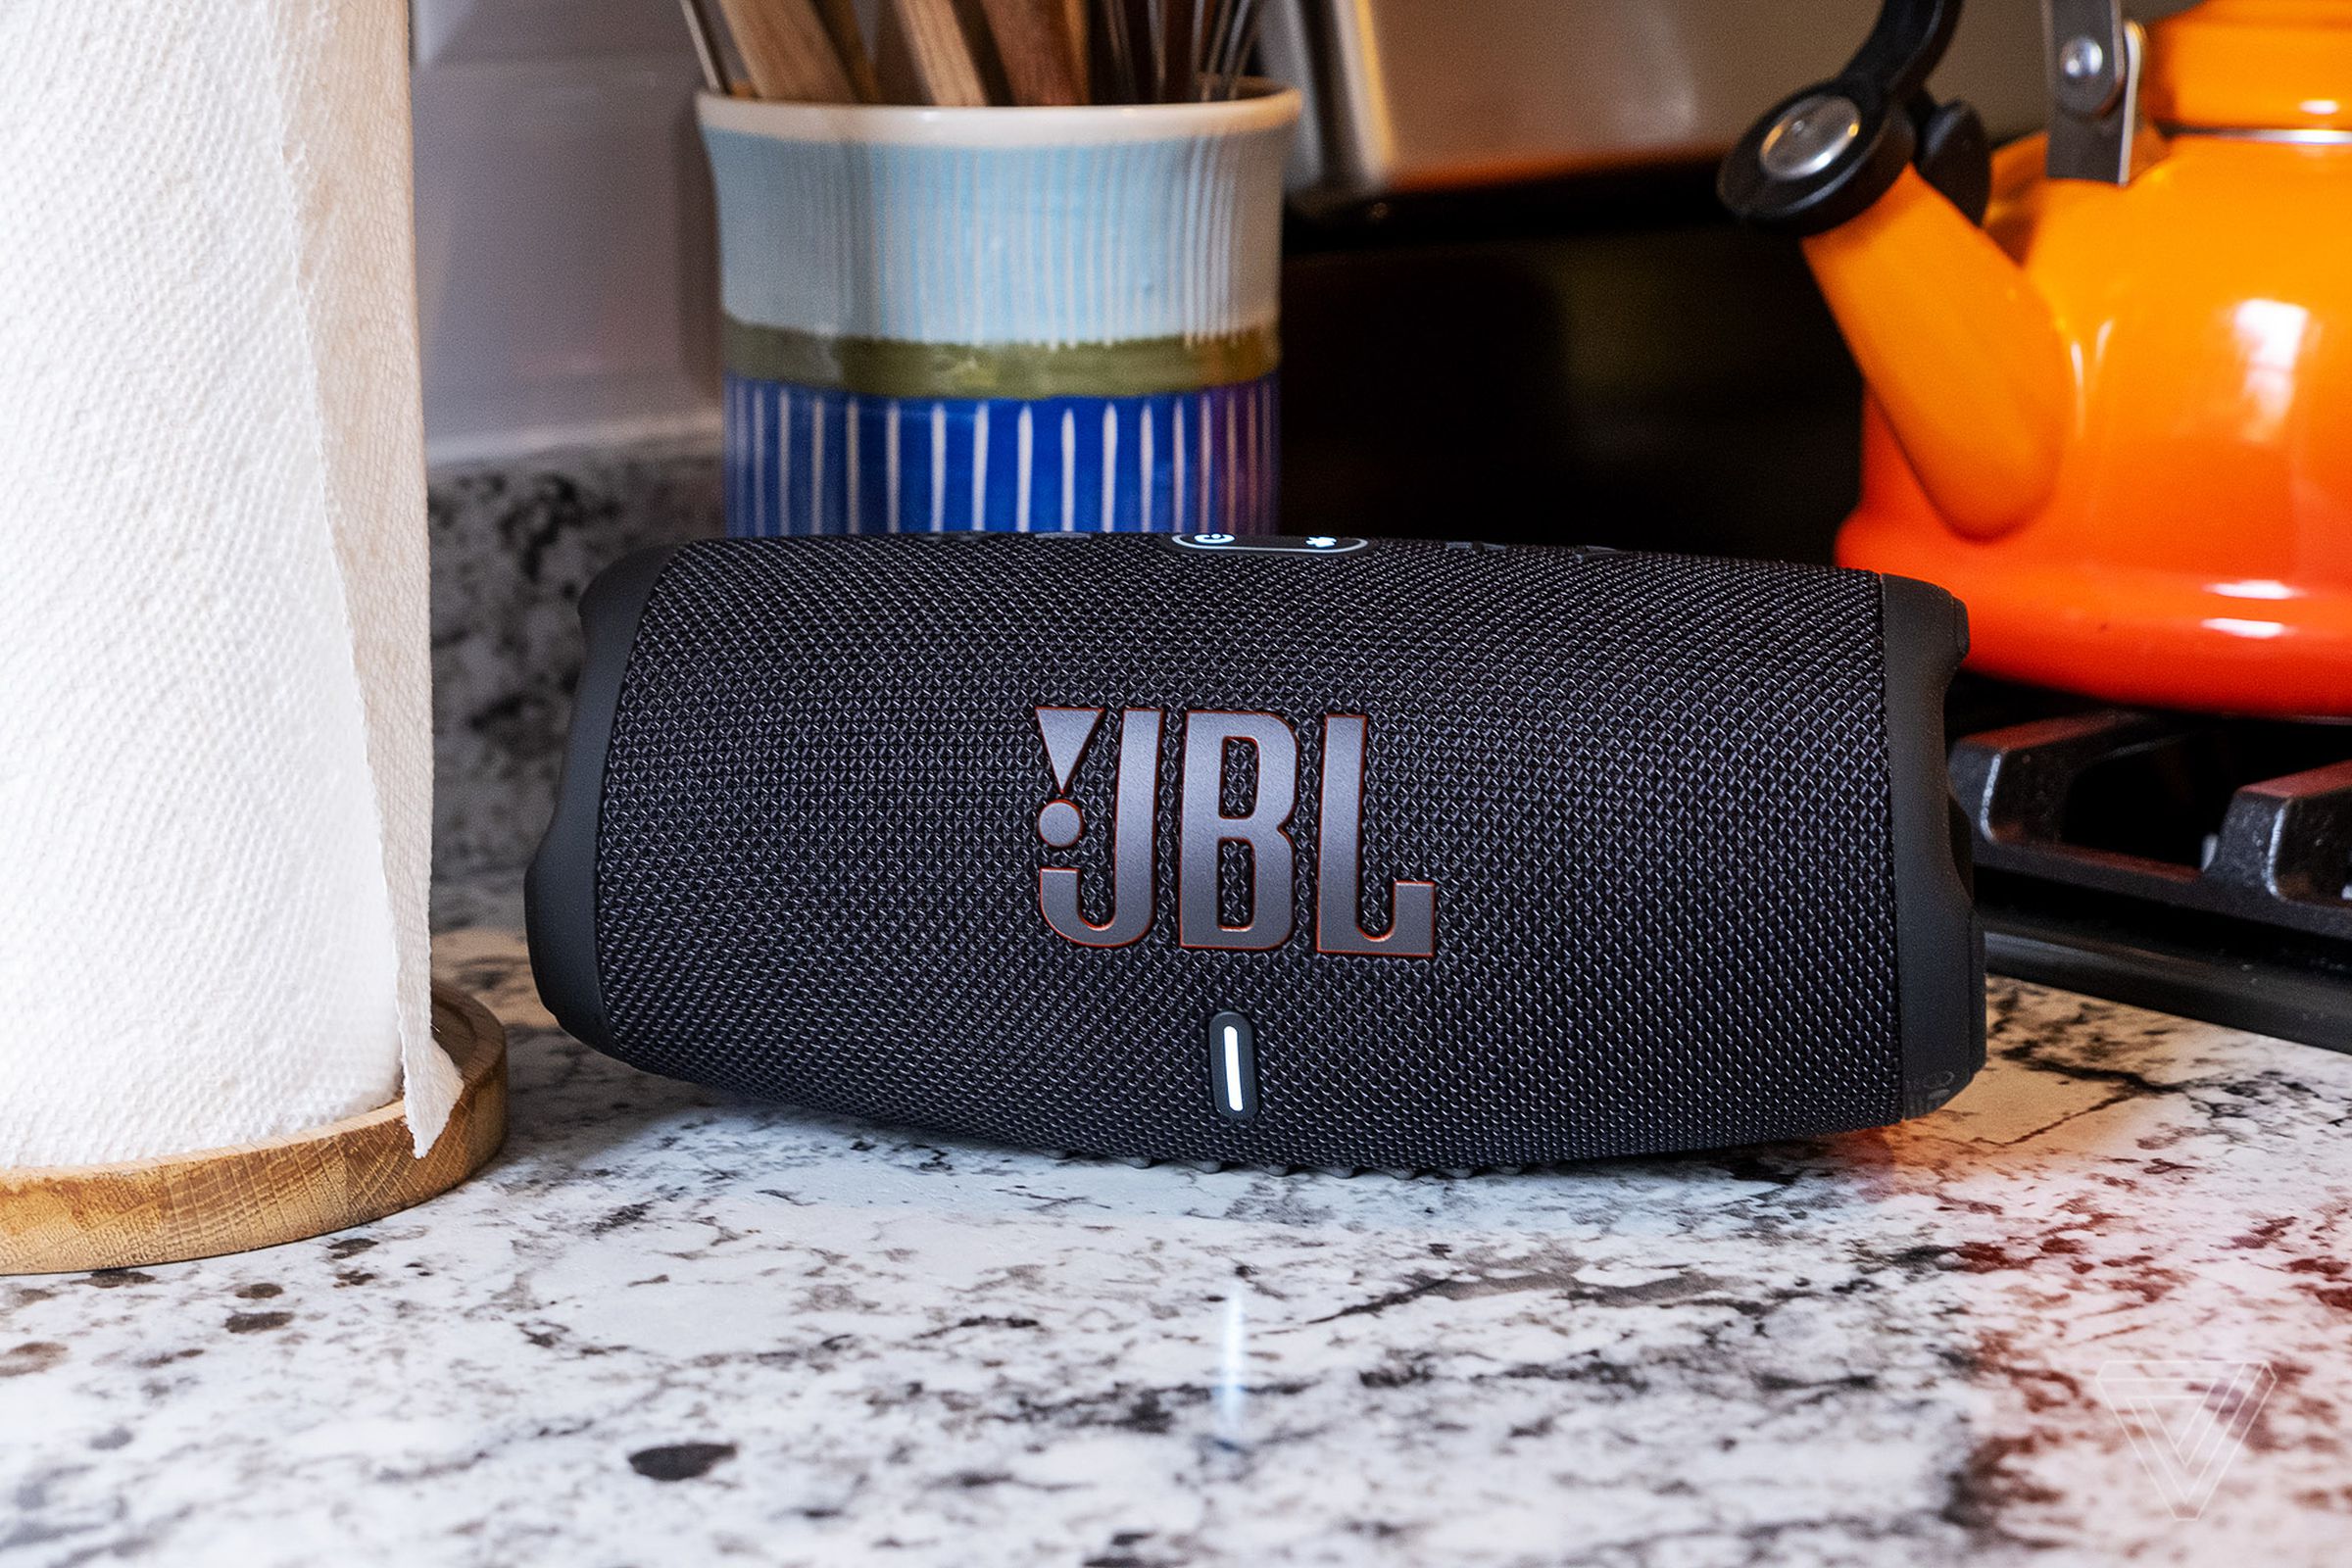 JBL’s Charge 5 is a perfect kitchen speaker.